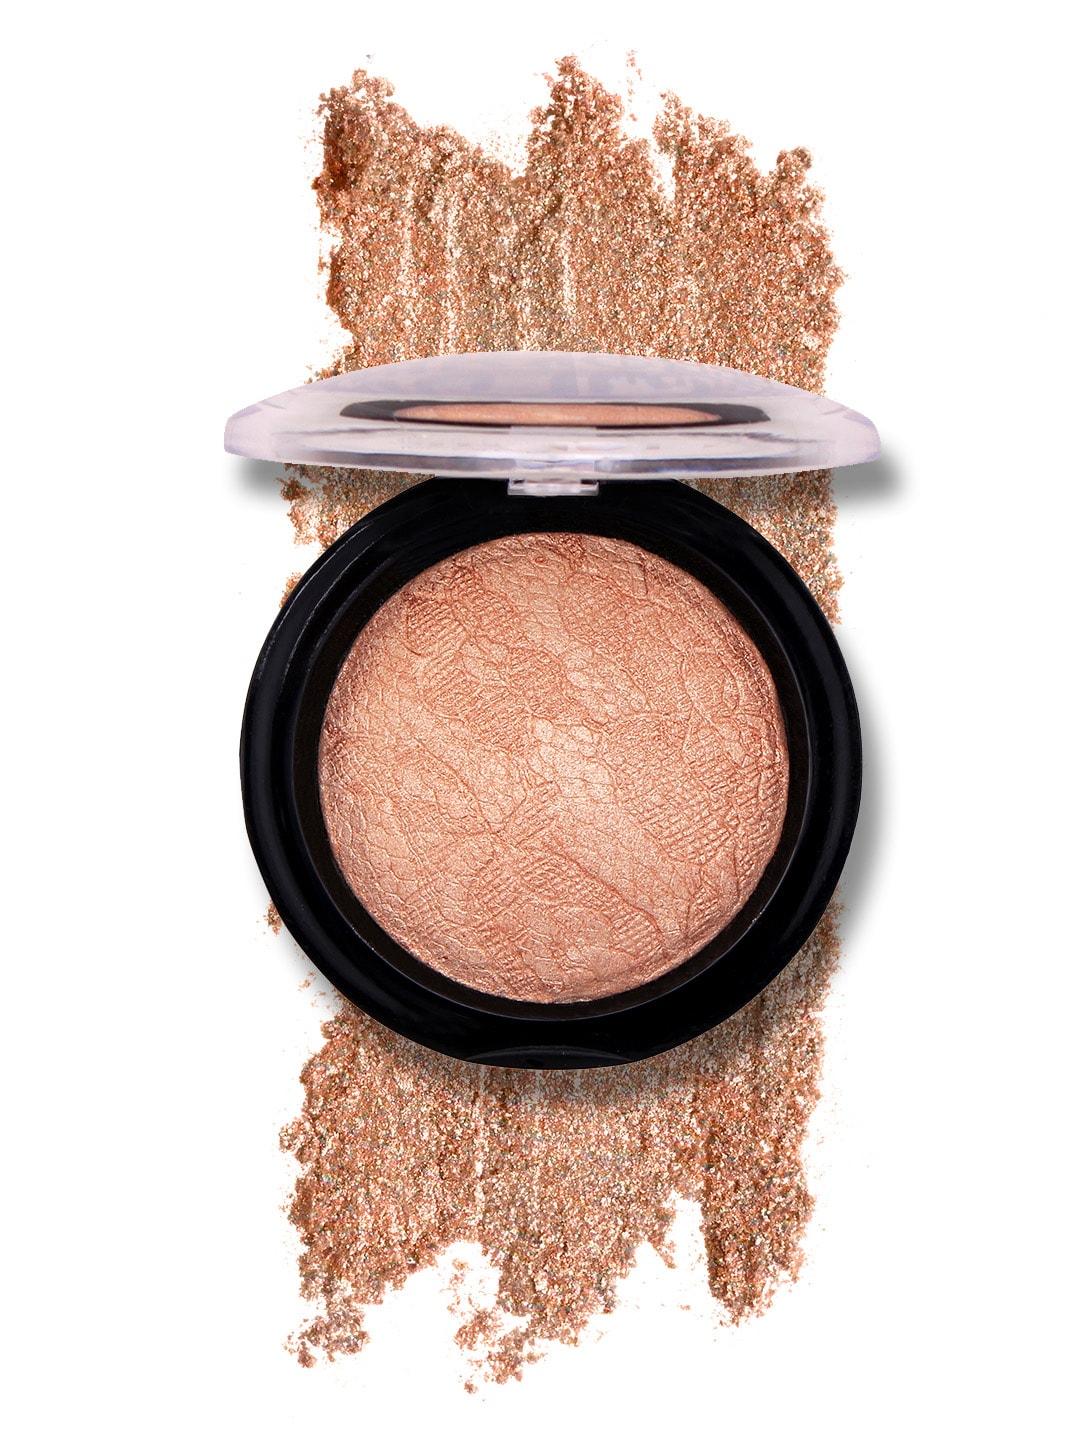 incolor-miracle-touch-05-shine-bronze-highlighter-9g